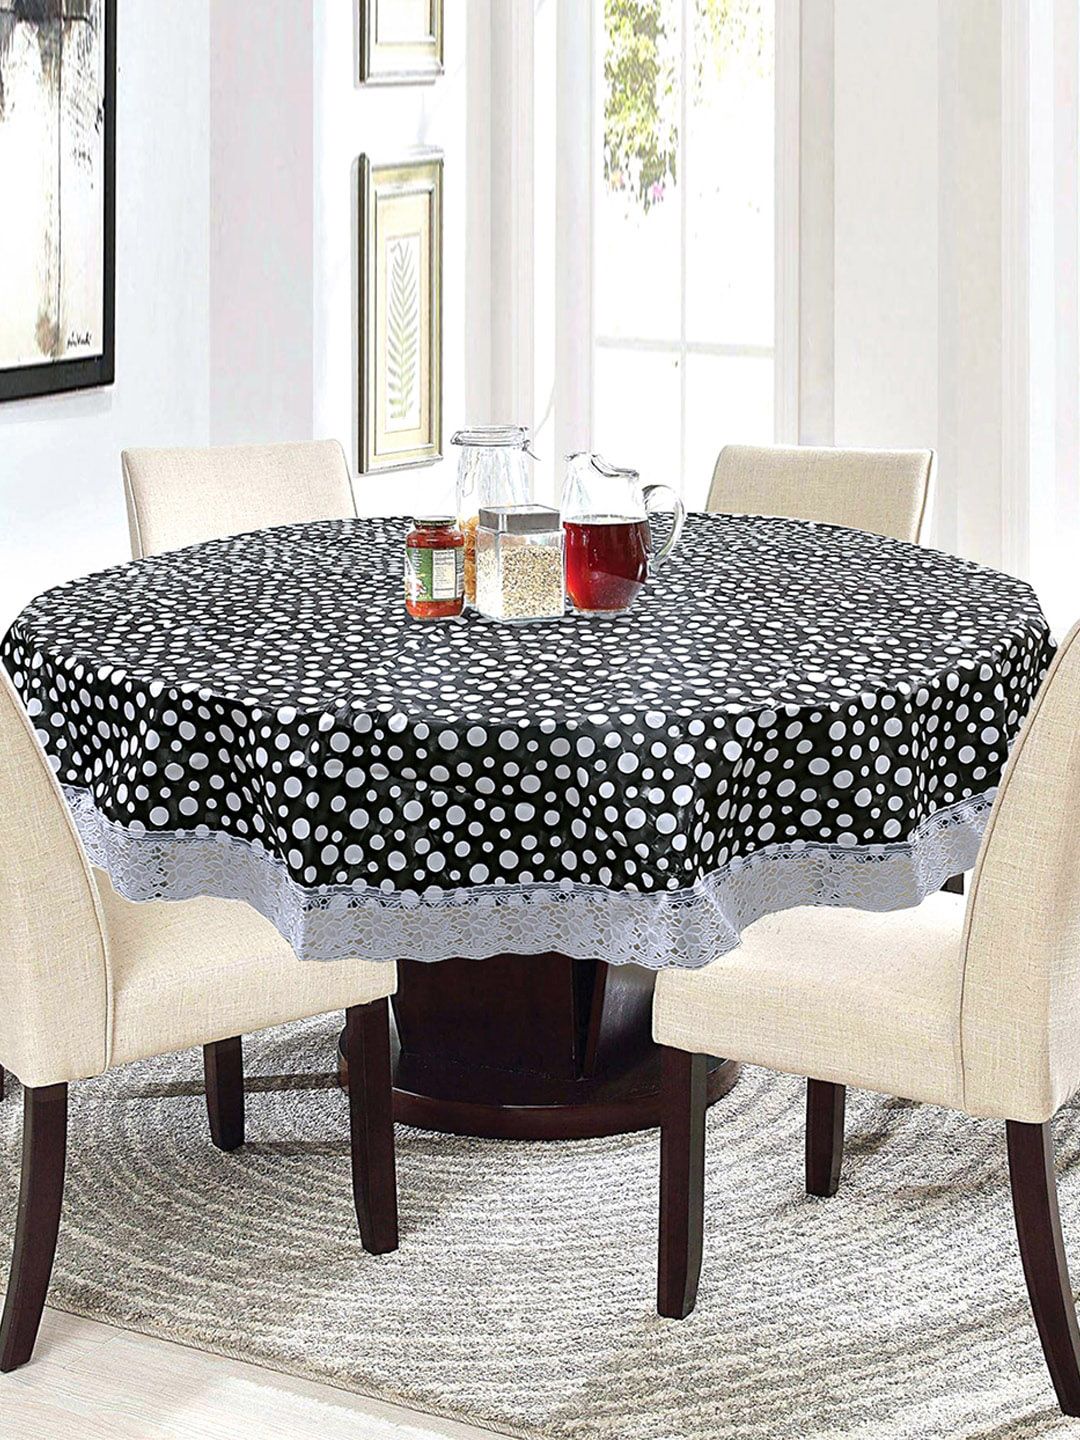 Kuber Industries Black & White Printed 6 Seater Round Table Cover Price in India